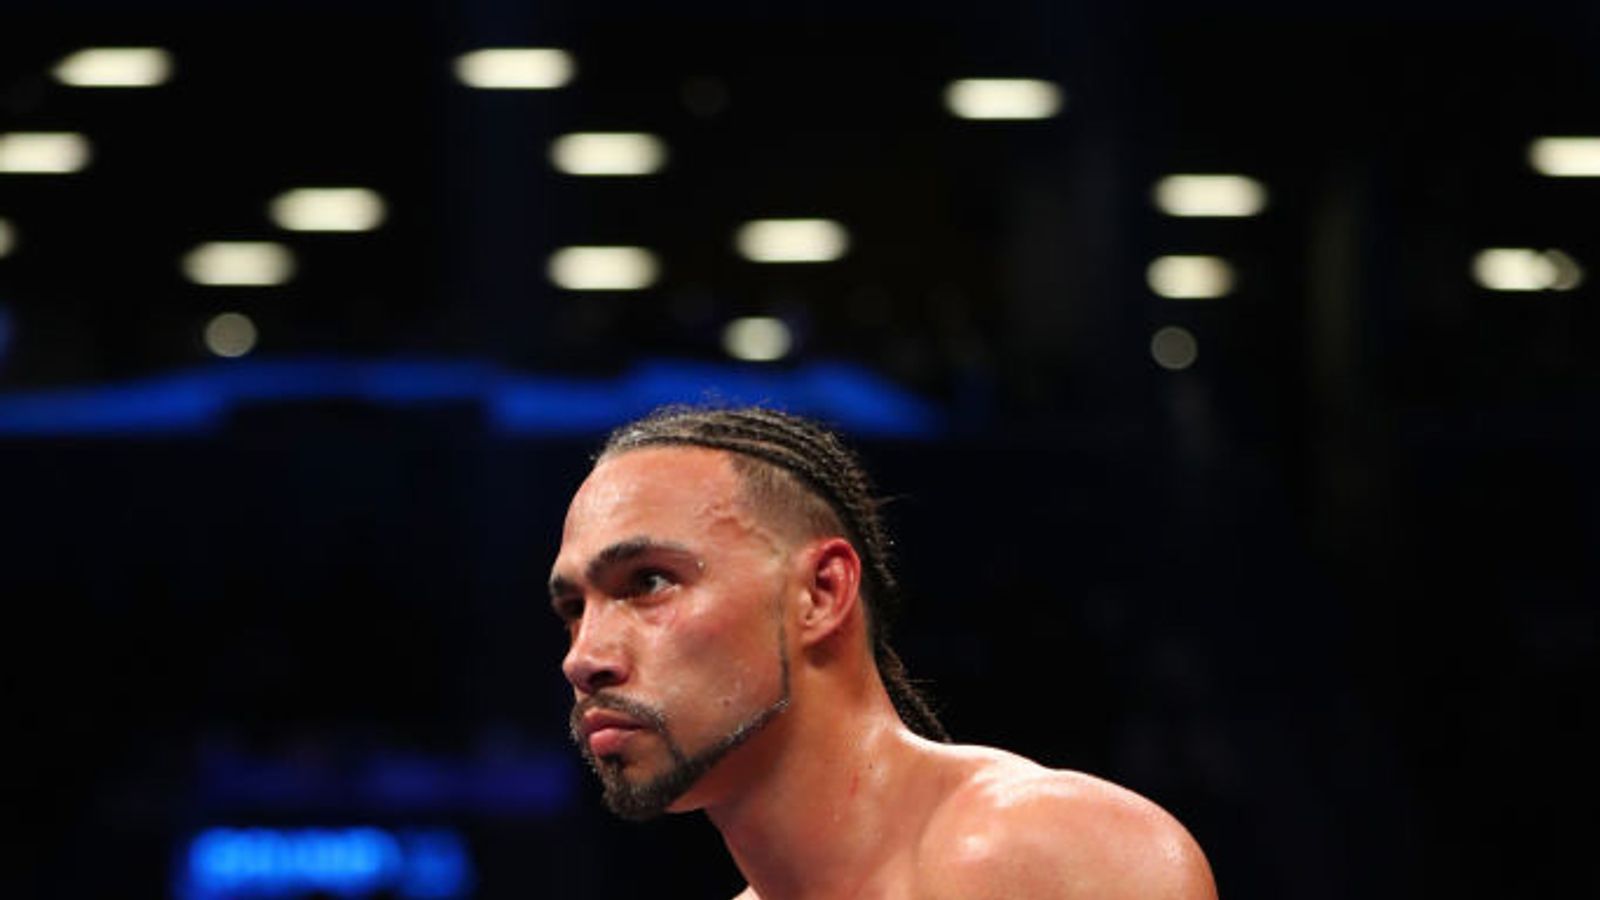 Keith Thurman relinquishes WBC welterweight title | Boxing News | Sky Sports1600 x 900